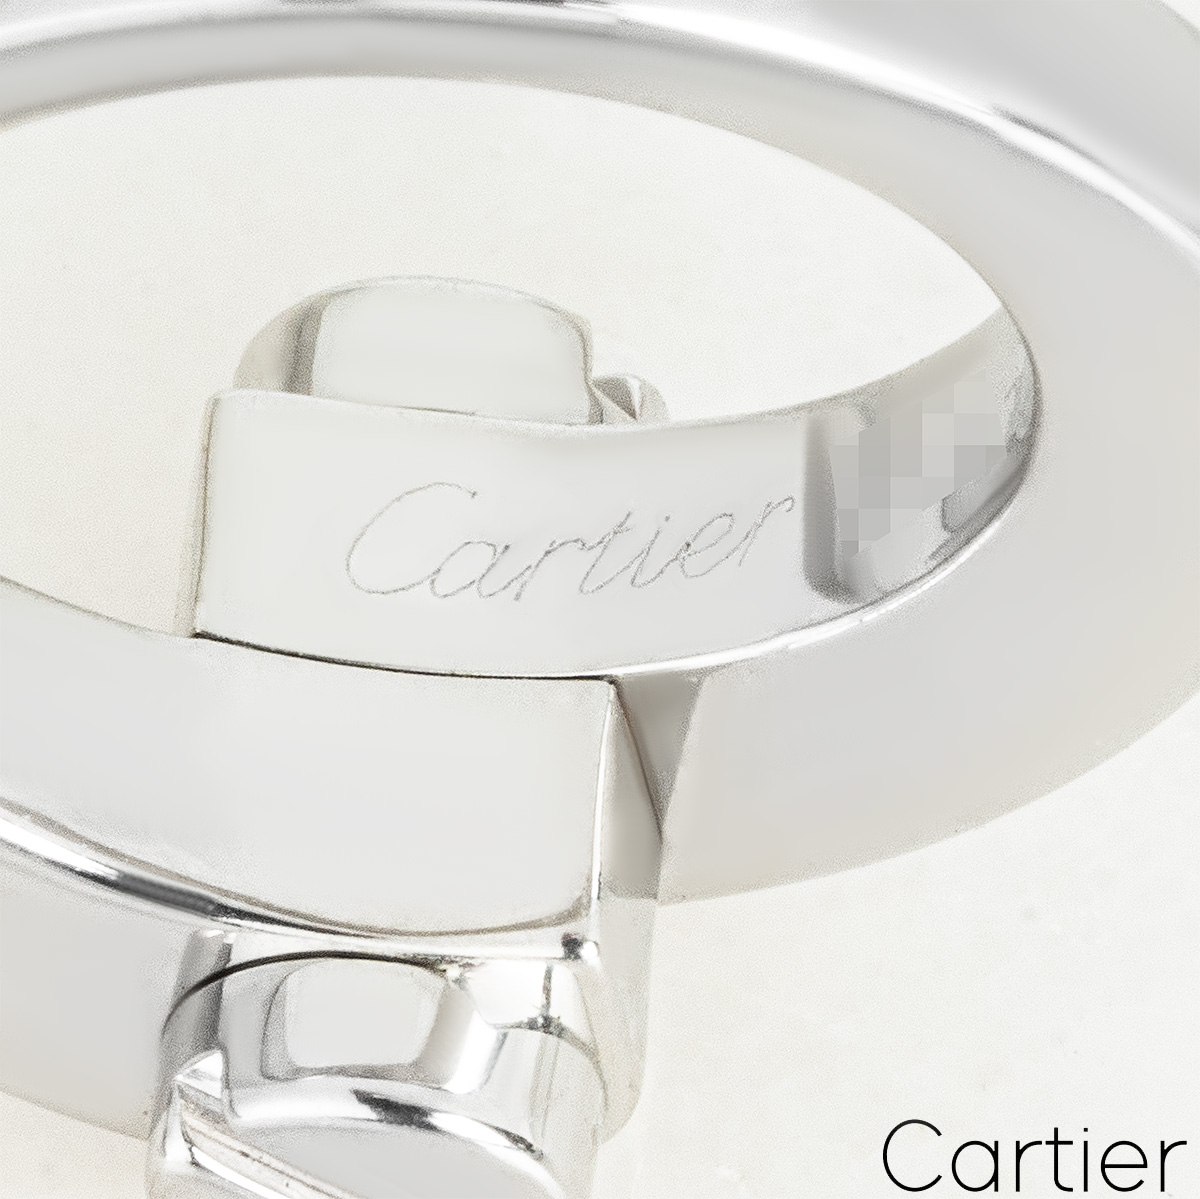 Cartier White Gold Menotte Ring Size 47